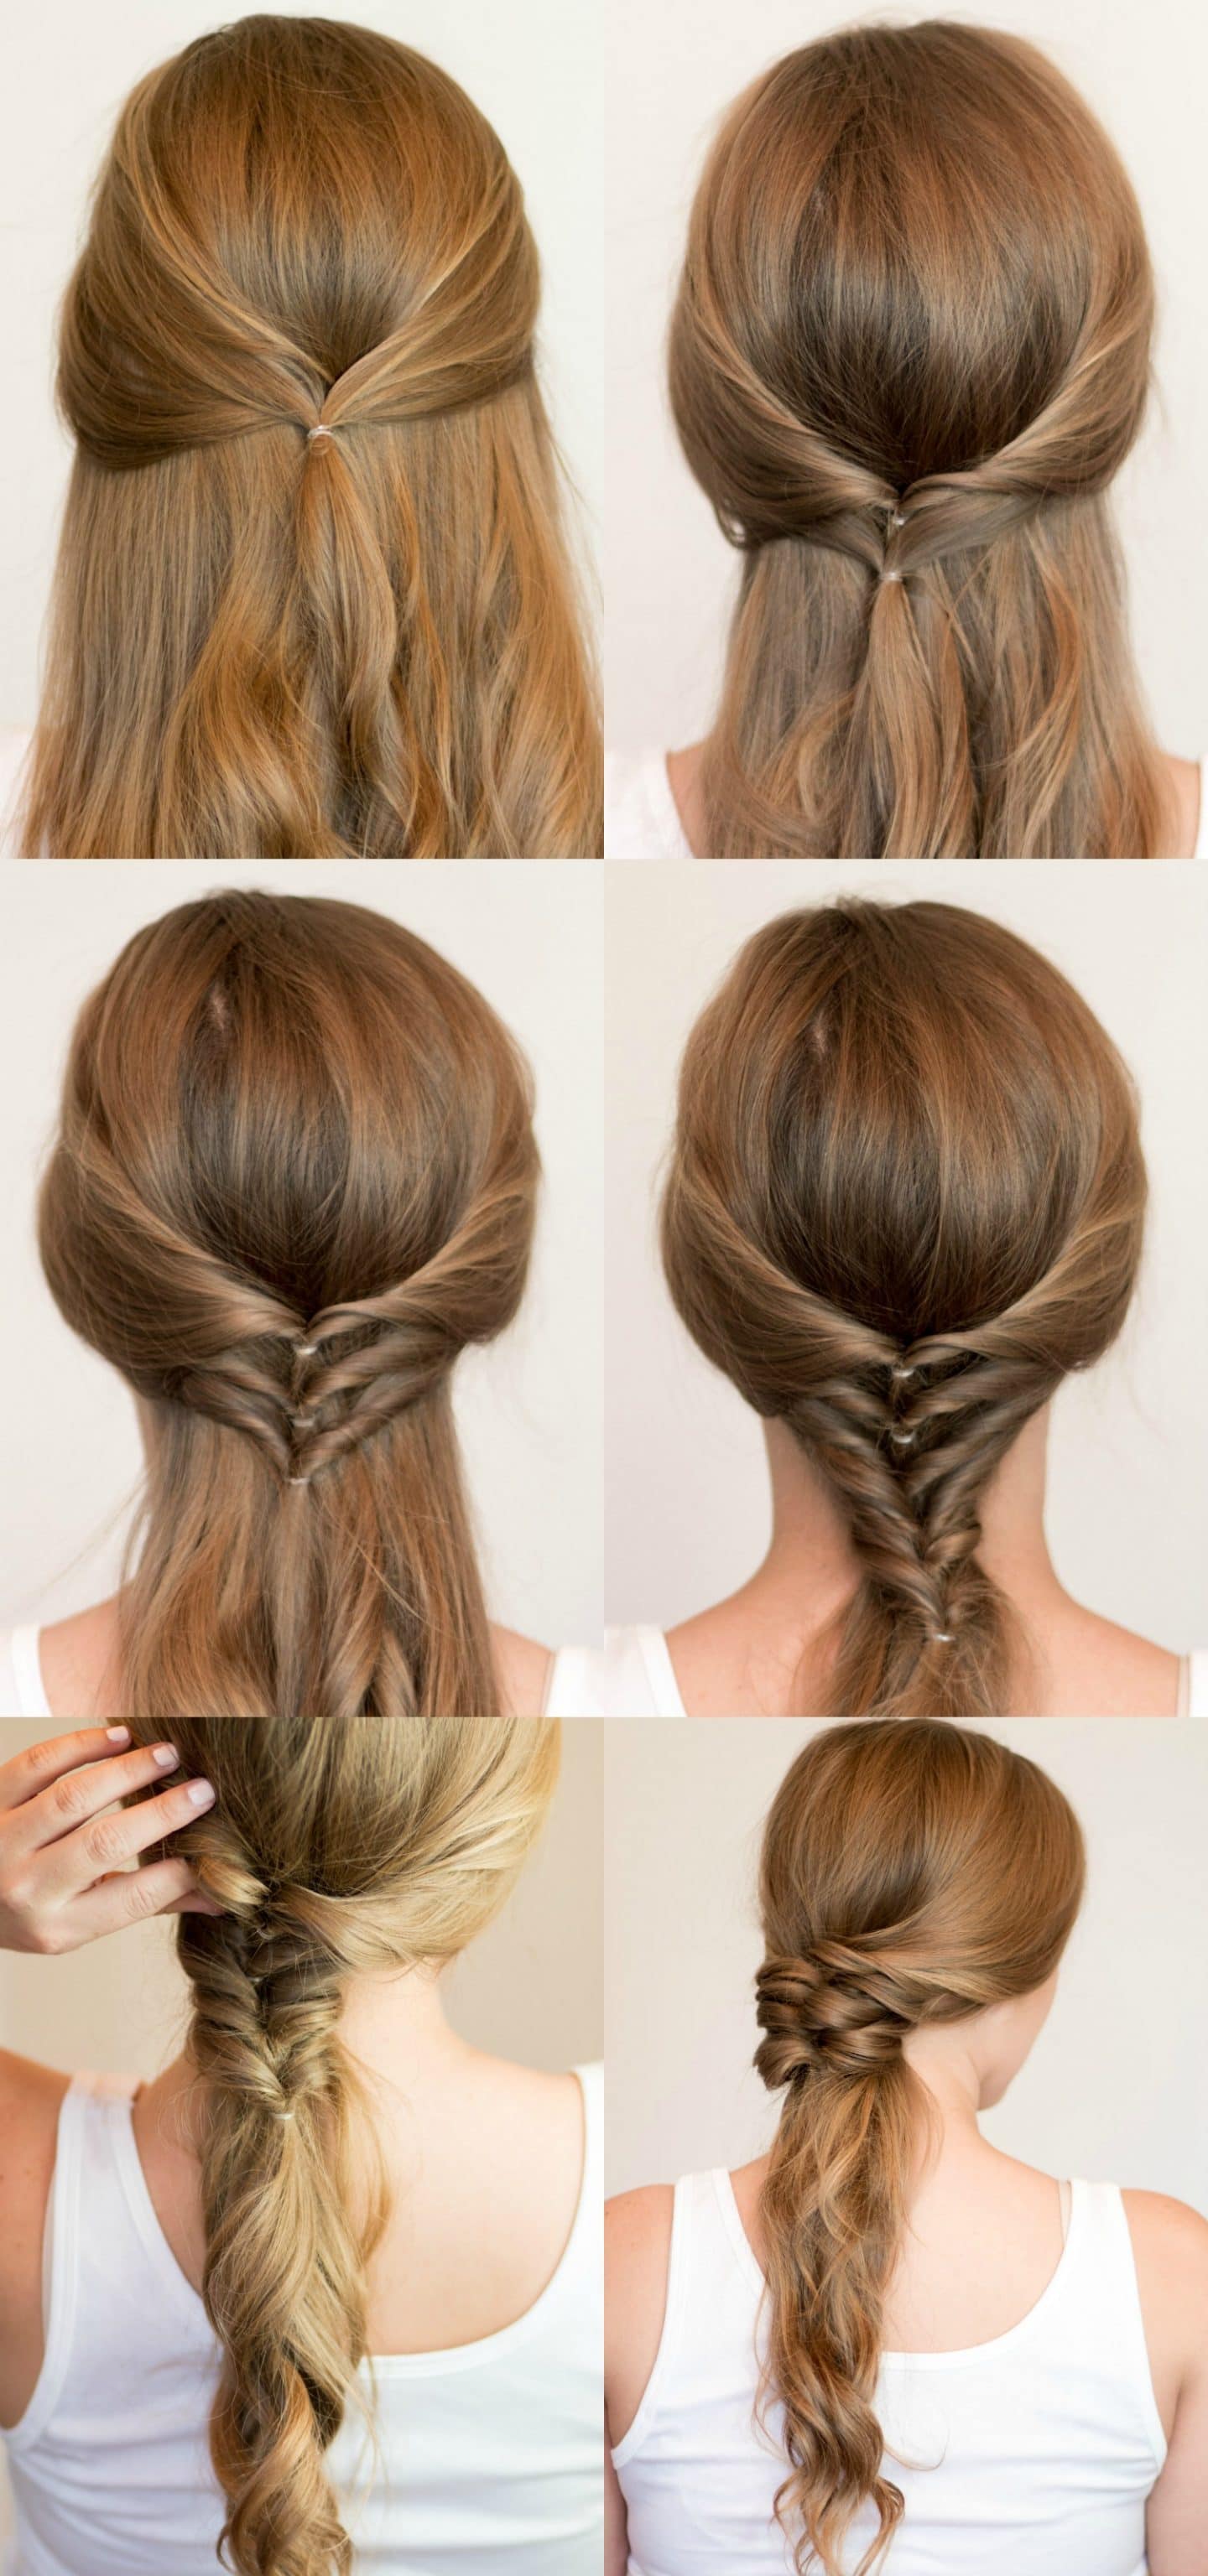 Faux Braided Ponytail hair tutorial | 4 Easy heatless hairstyles for long hair that don't require hair styling skills or braiding! Learn how to create a faux braided ponytail, messy faux fishtail braid, twisted half-up, and messy braided bun in these easy hair tutorial by Orlando, Florida beauty blogger Ashley Brooke Nicholas! #MyHCLook sponsored by Hair Cuttery! | easy hairstyles, no-heat hairstyle, faux braids, faux braid tutorial, how to braid your hair, fishtail braid, long dirty blonde hair